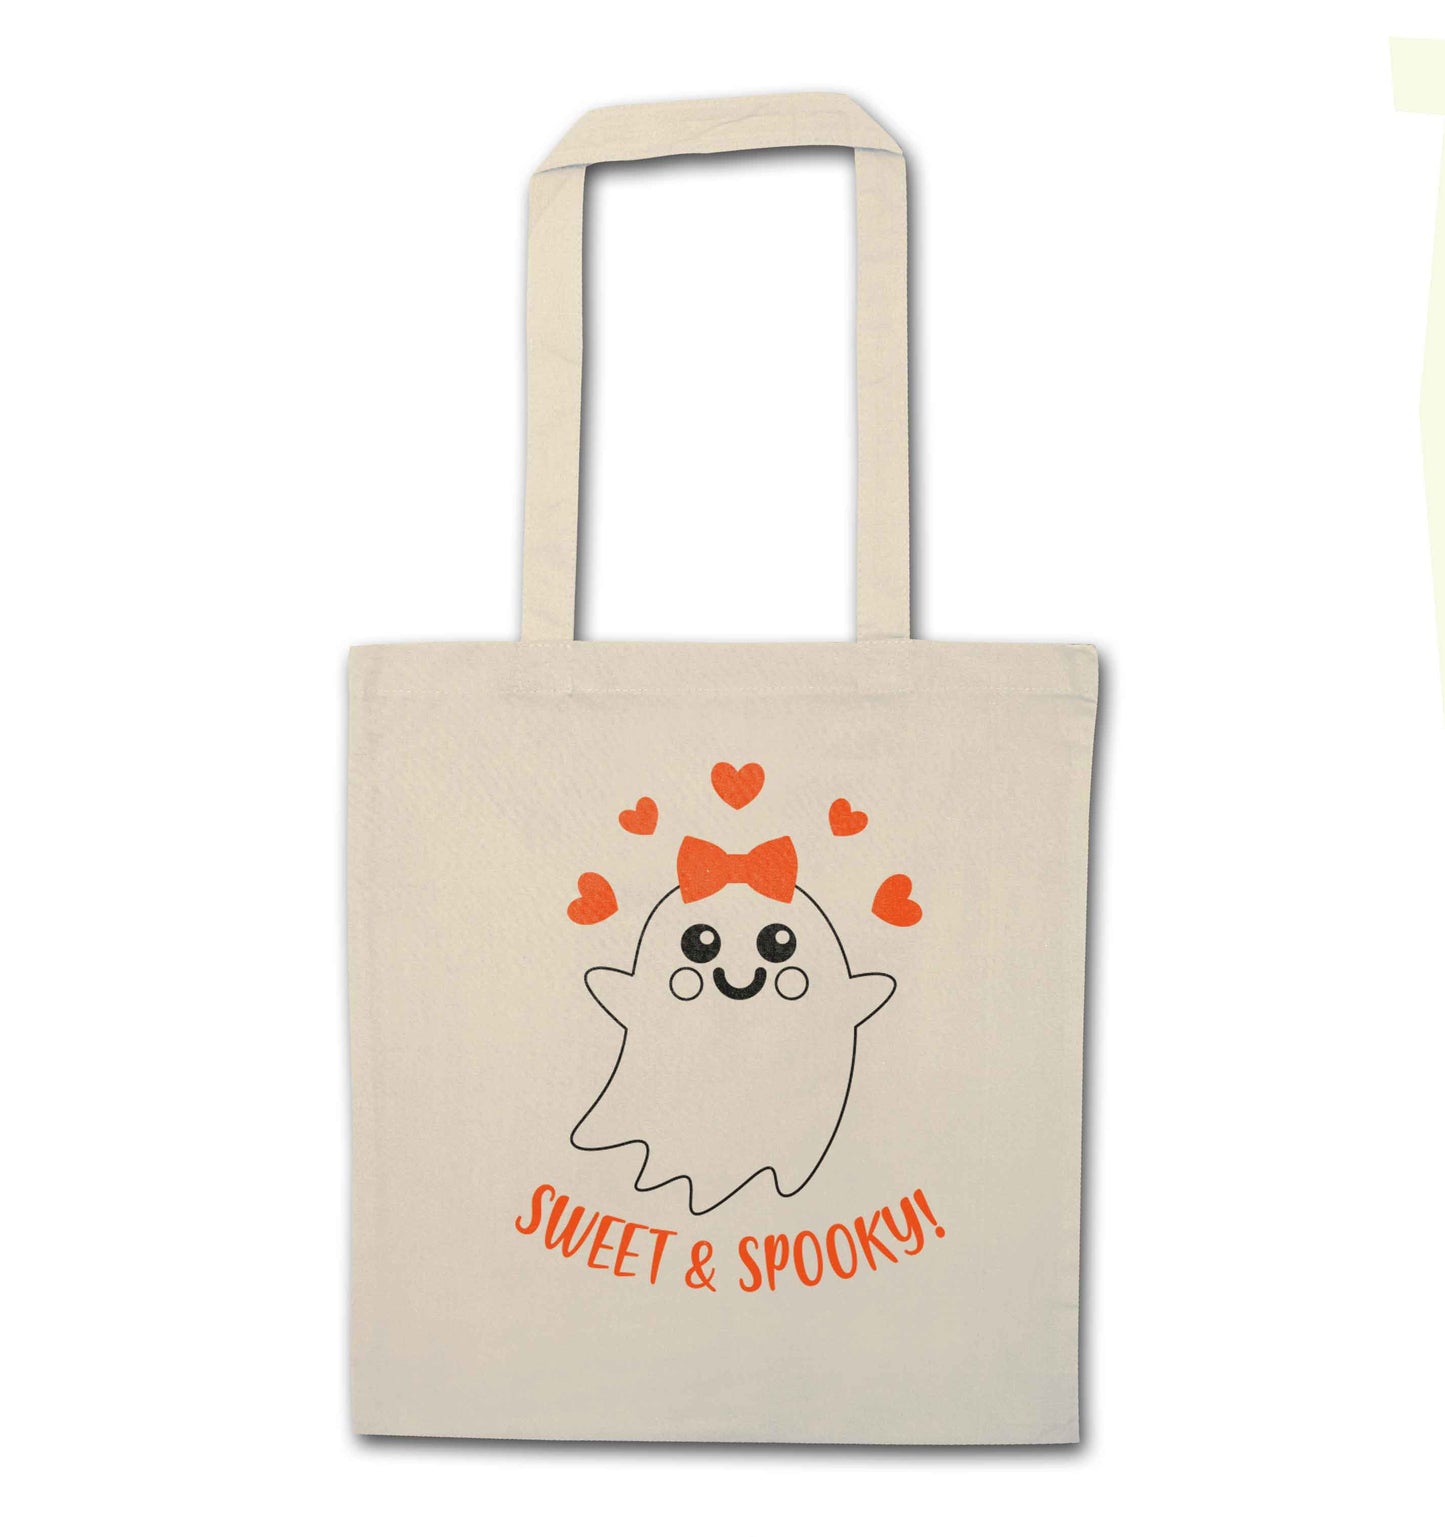 Sweet and spooky natural tote bag